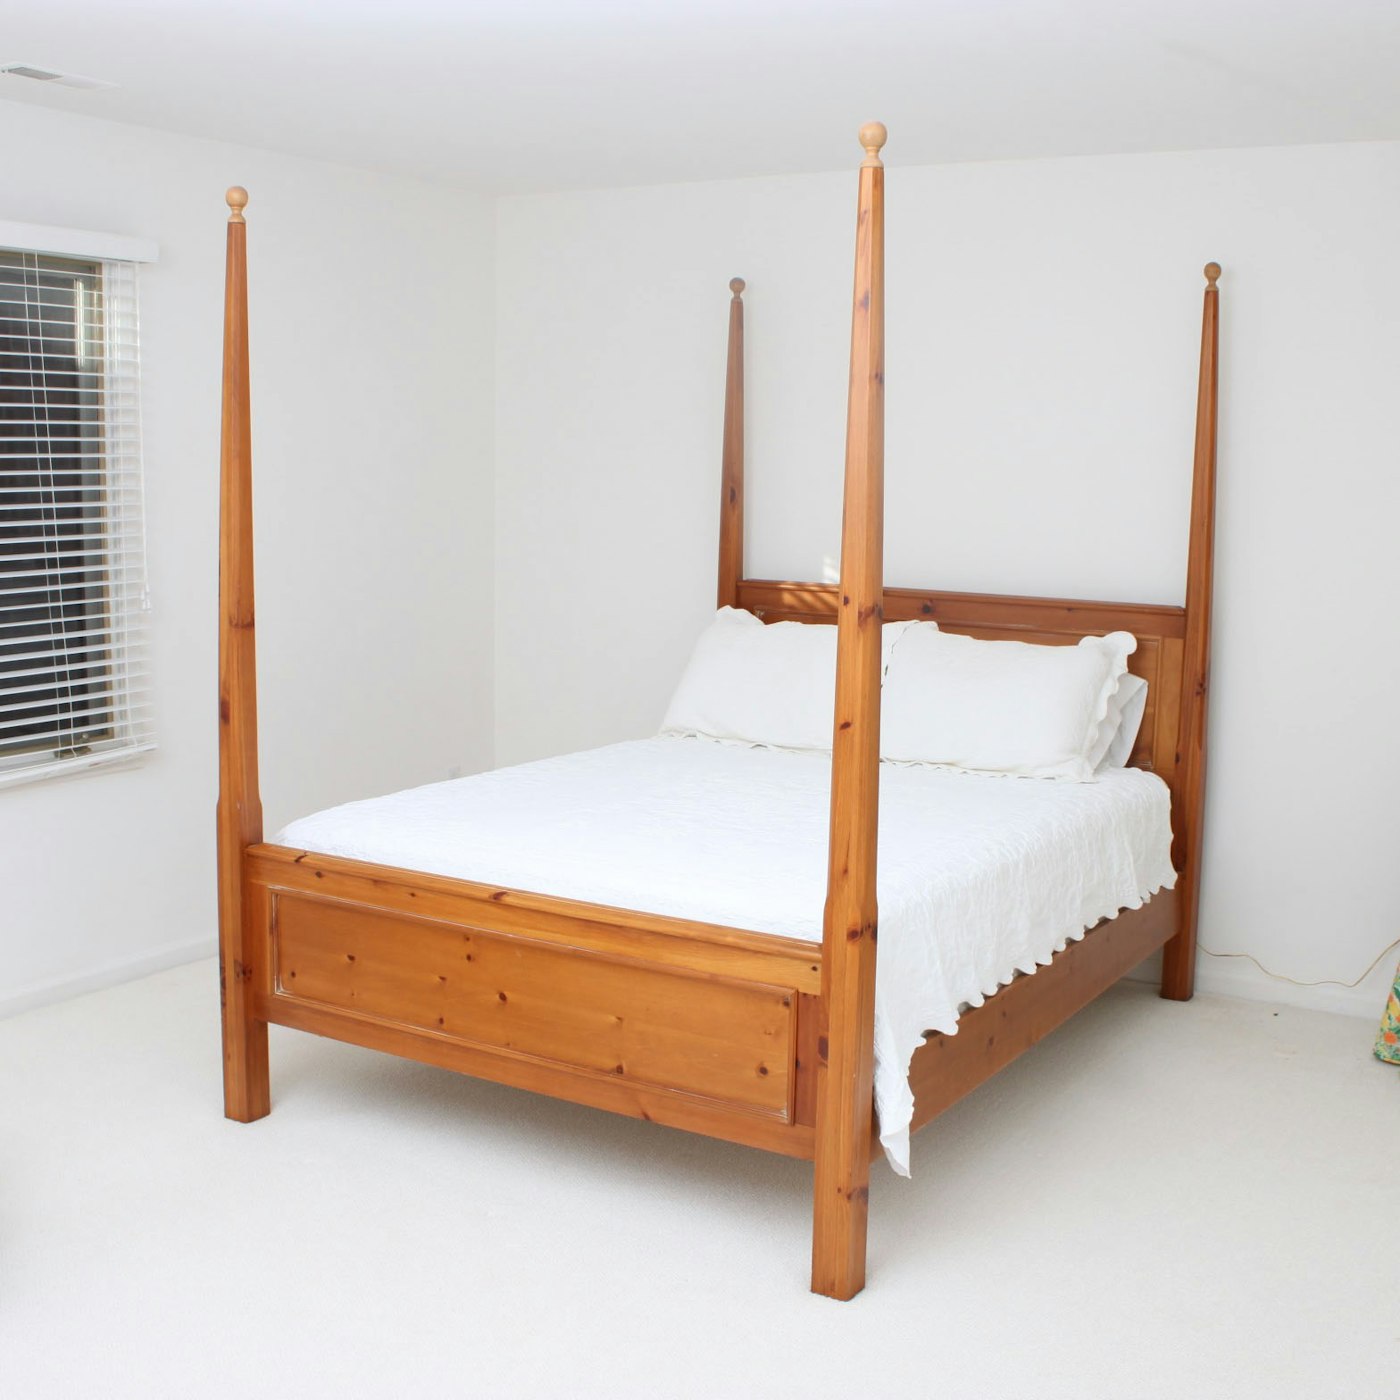 Queen-Size Pine Four Poster Bed Frame : EBTH